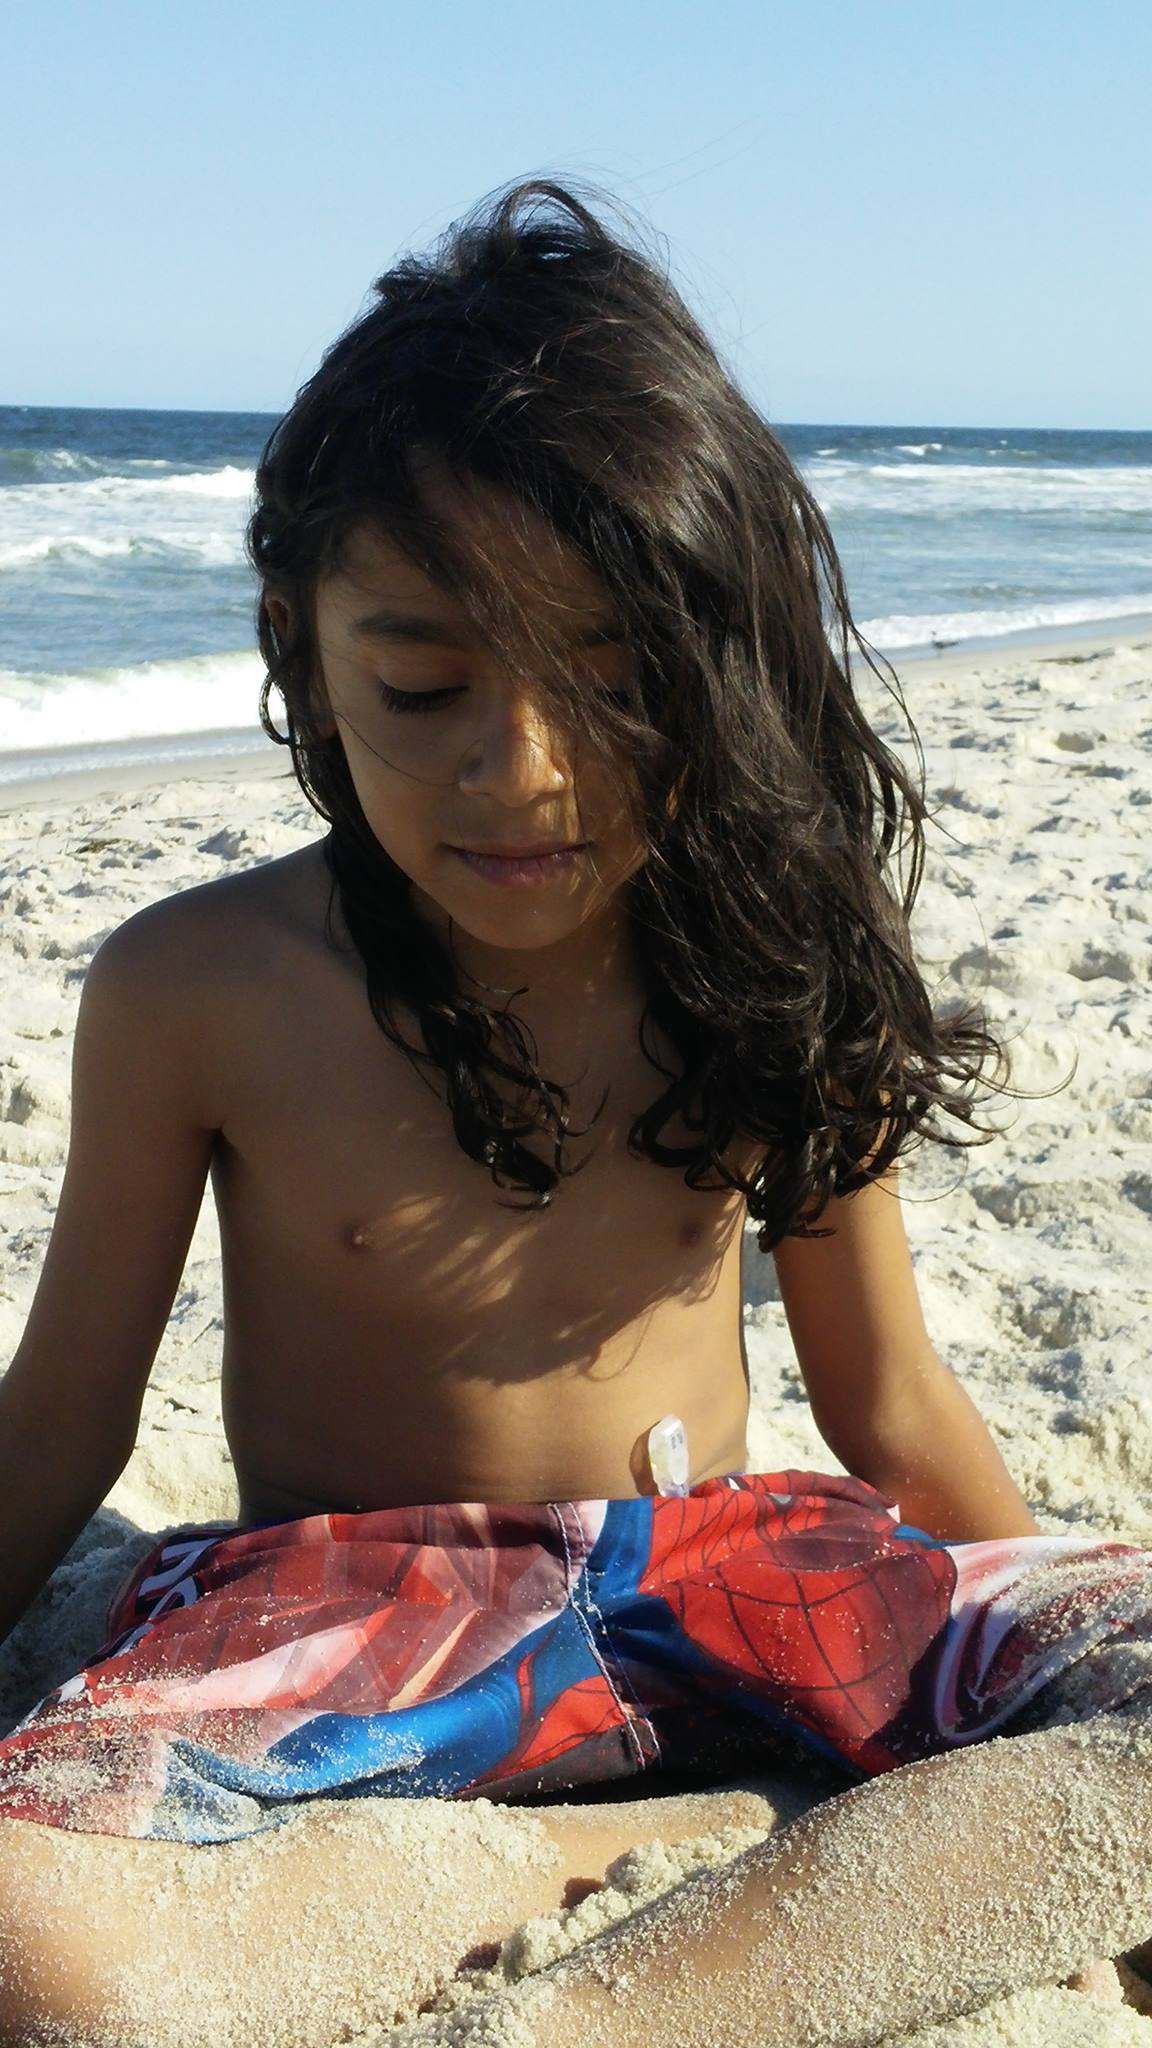 A young boy with long hair at the beach. 